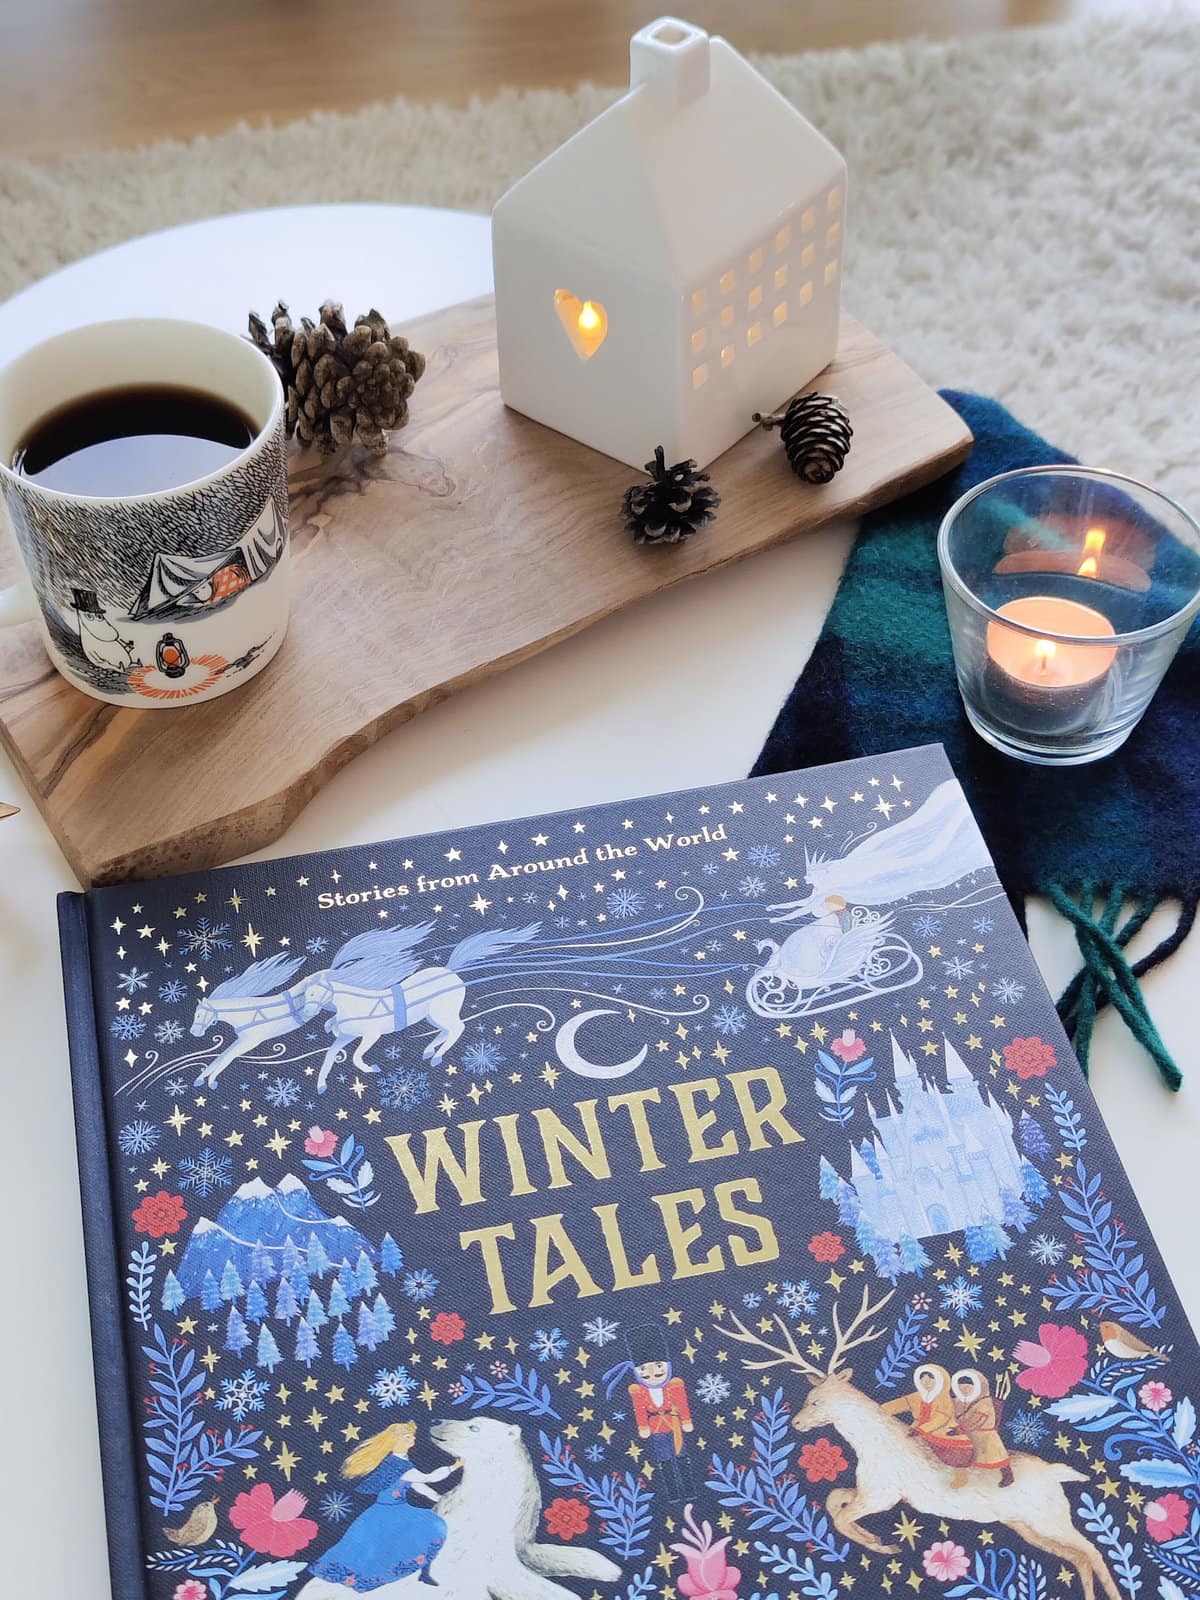 winter tales by dawn casey and zanna goldhawk in cozy setting with coffee and candles